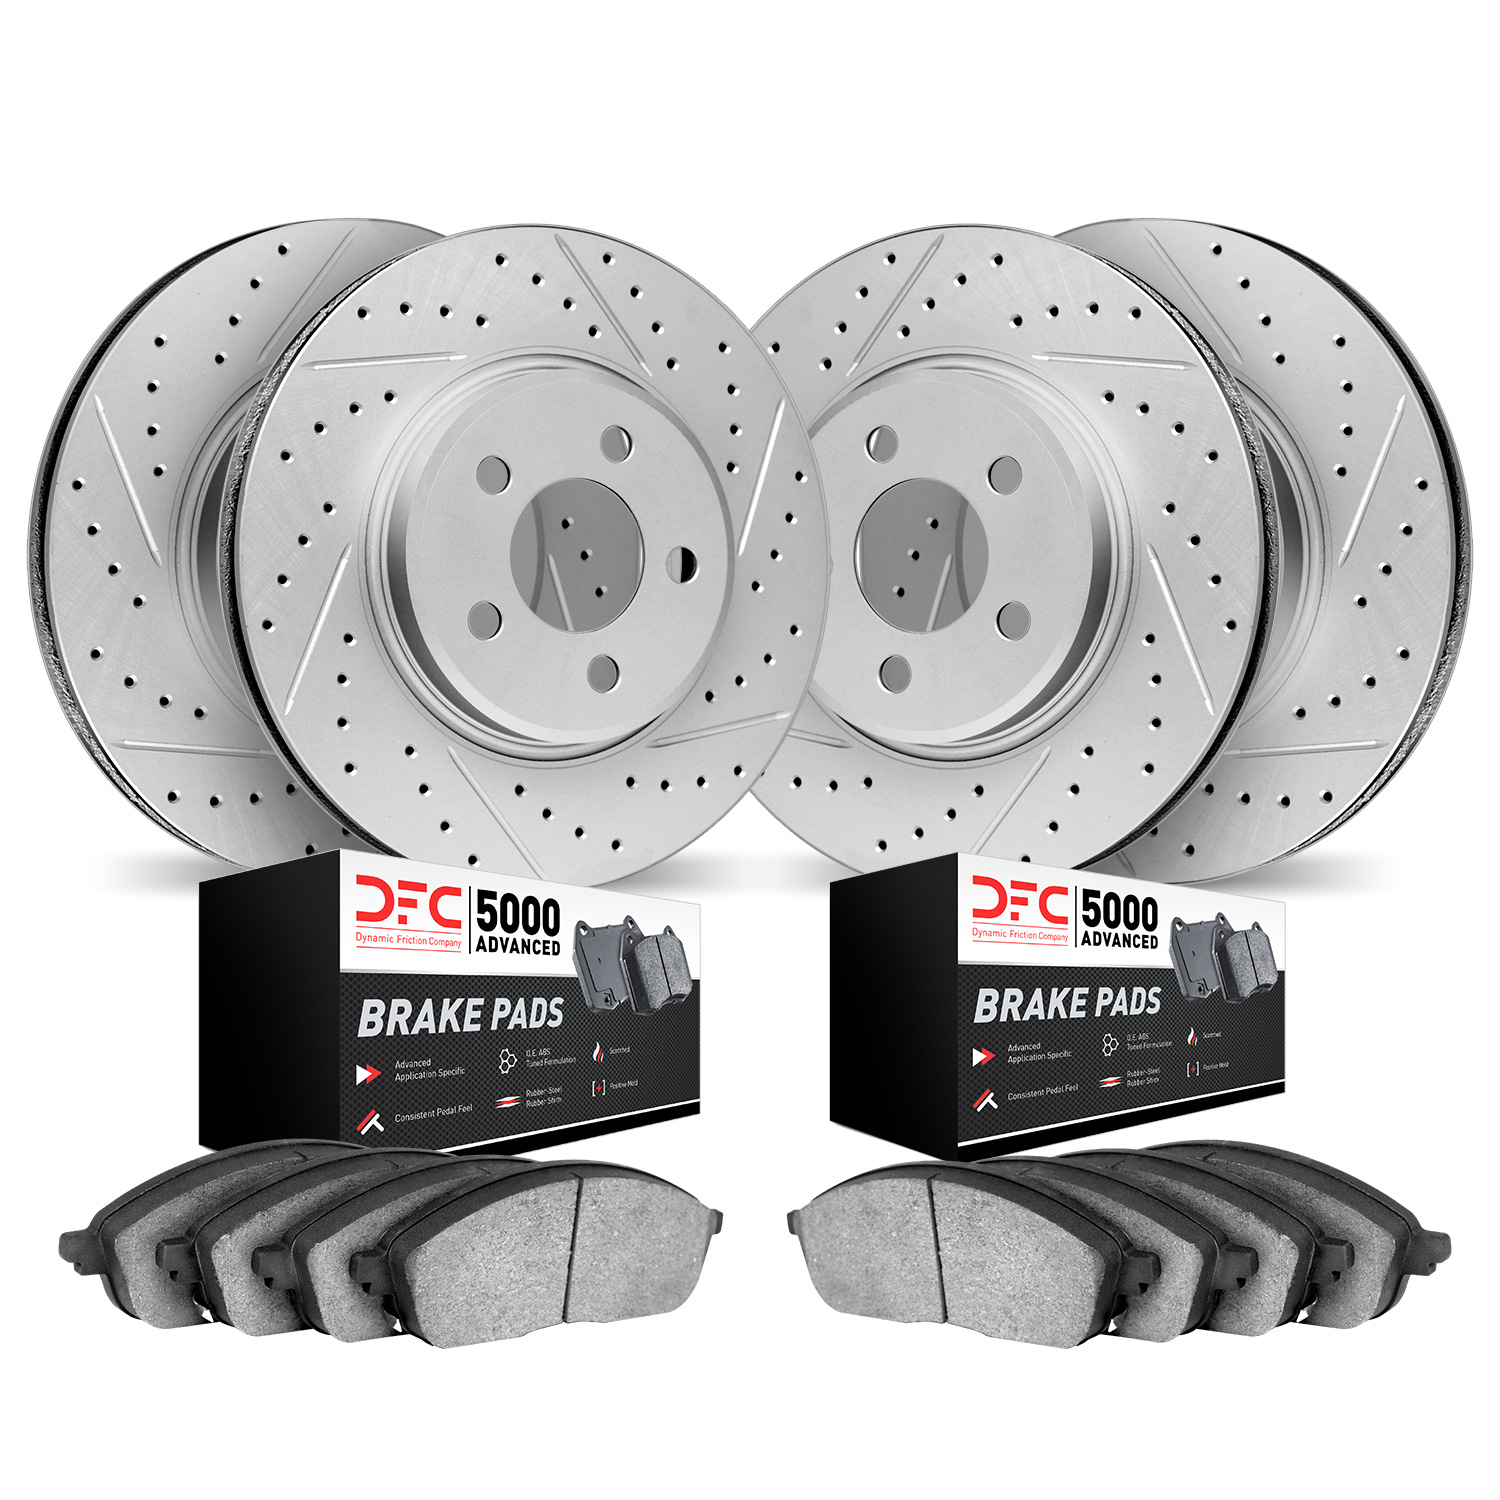 2504-67069 Geoperformance Drilled/Slotted Rotors w/5000 Advanced Brake Pads Kit, 2011-2013 Infiniti/Nissan, Position: Front and